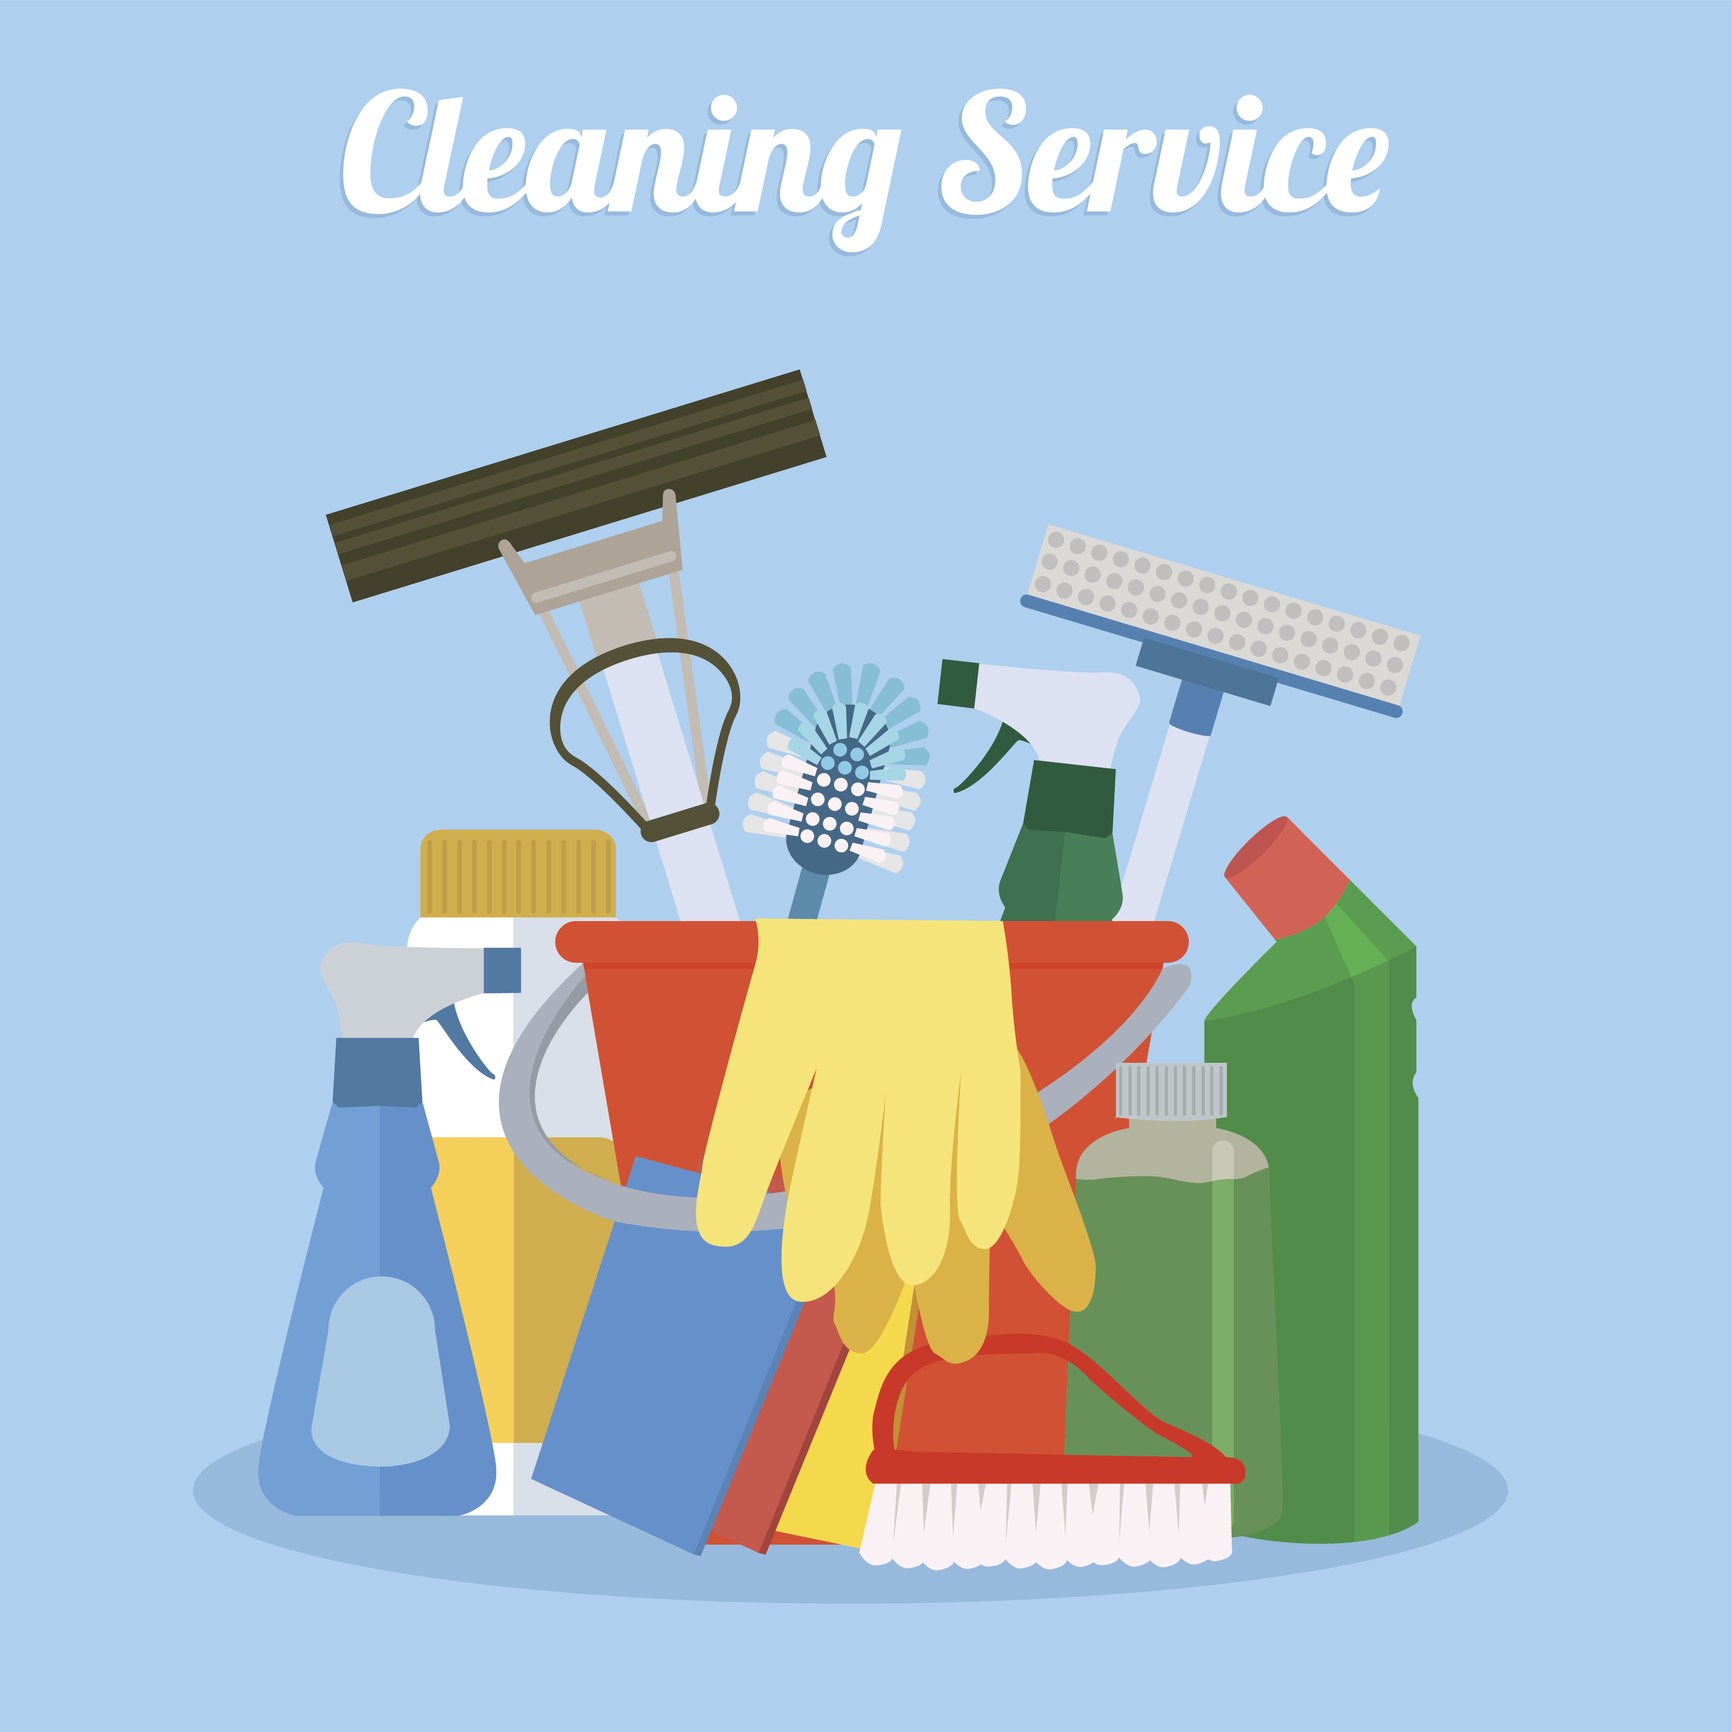 Pat's Cleaning Service